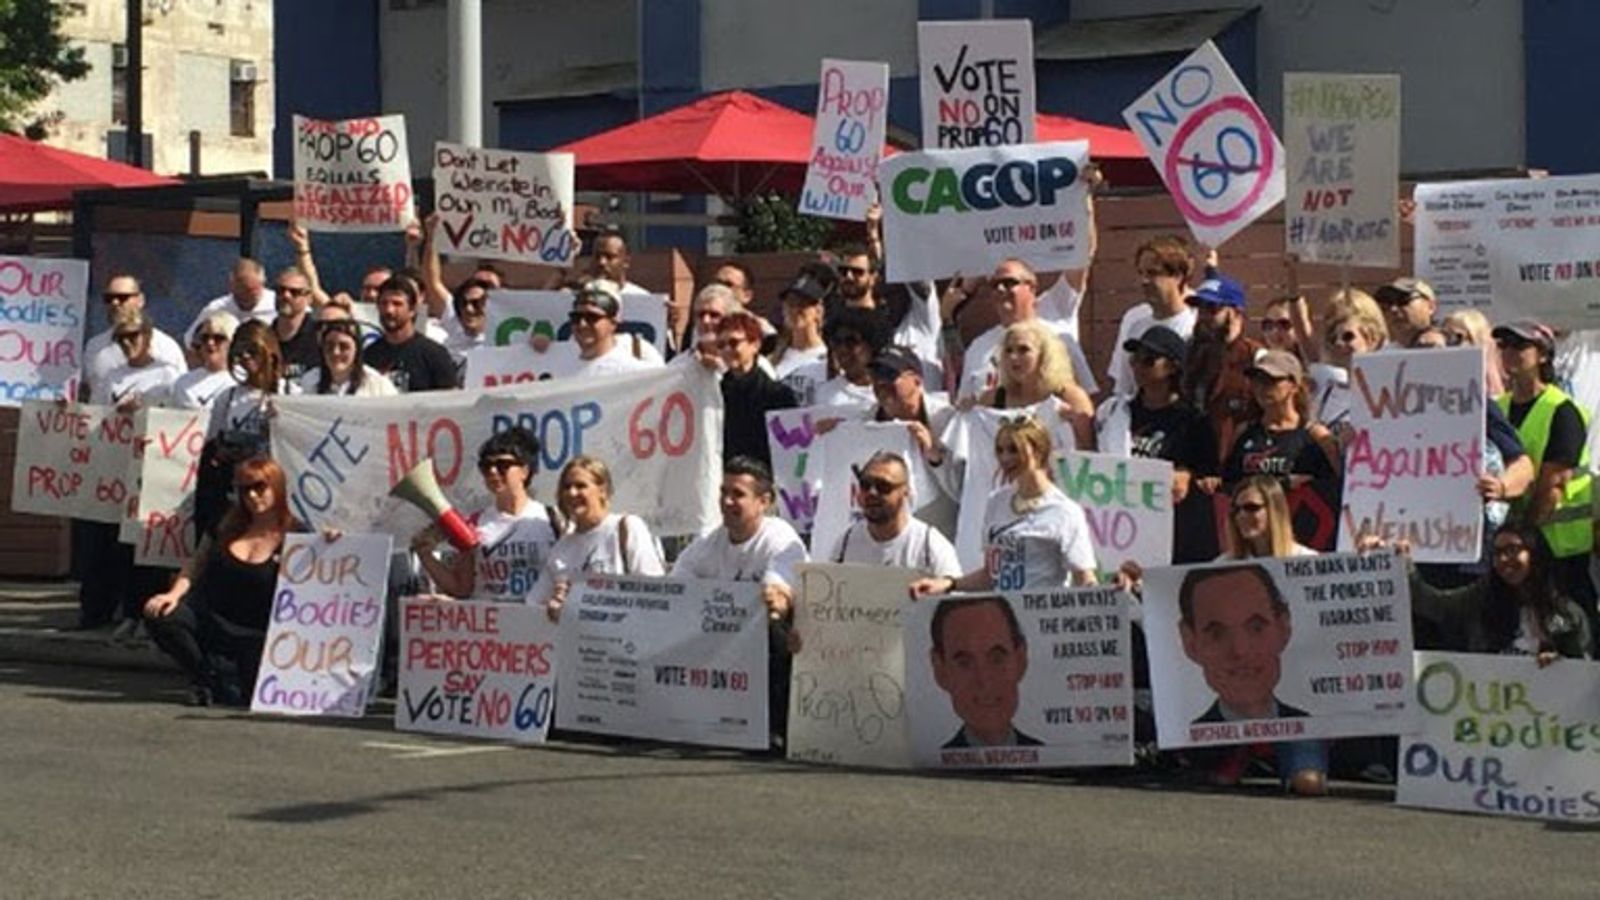 Adult Stars To Fight Prop 60 at Farmer's Markets Across LA This Weekend